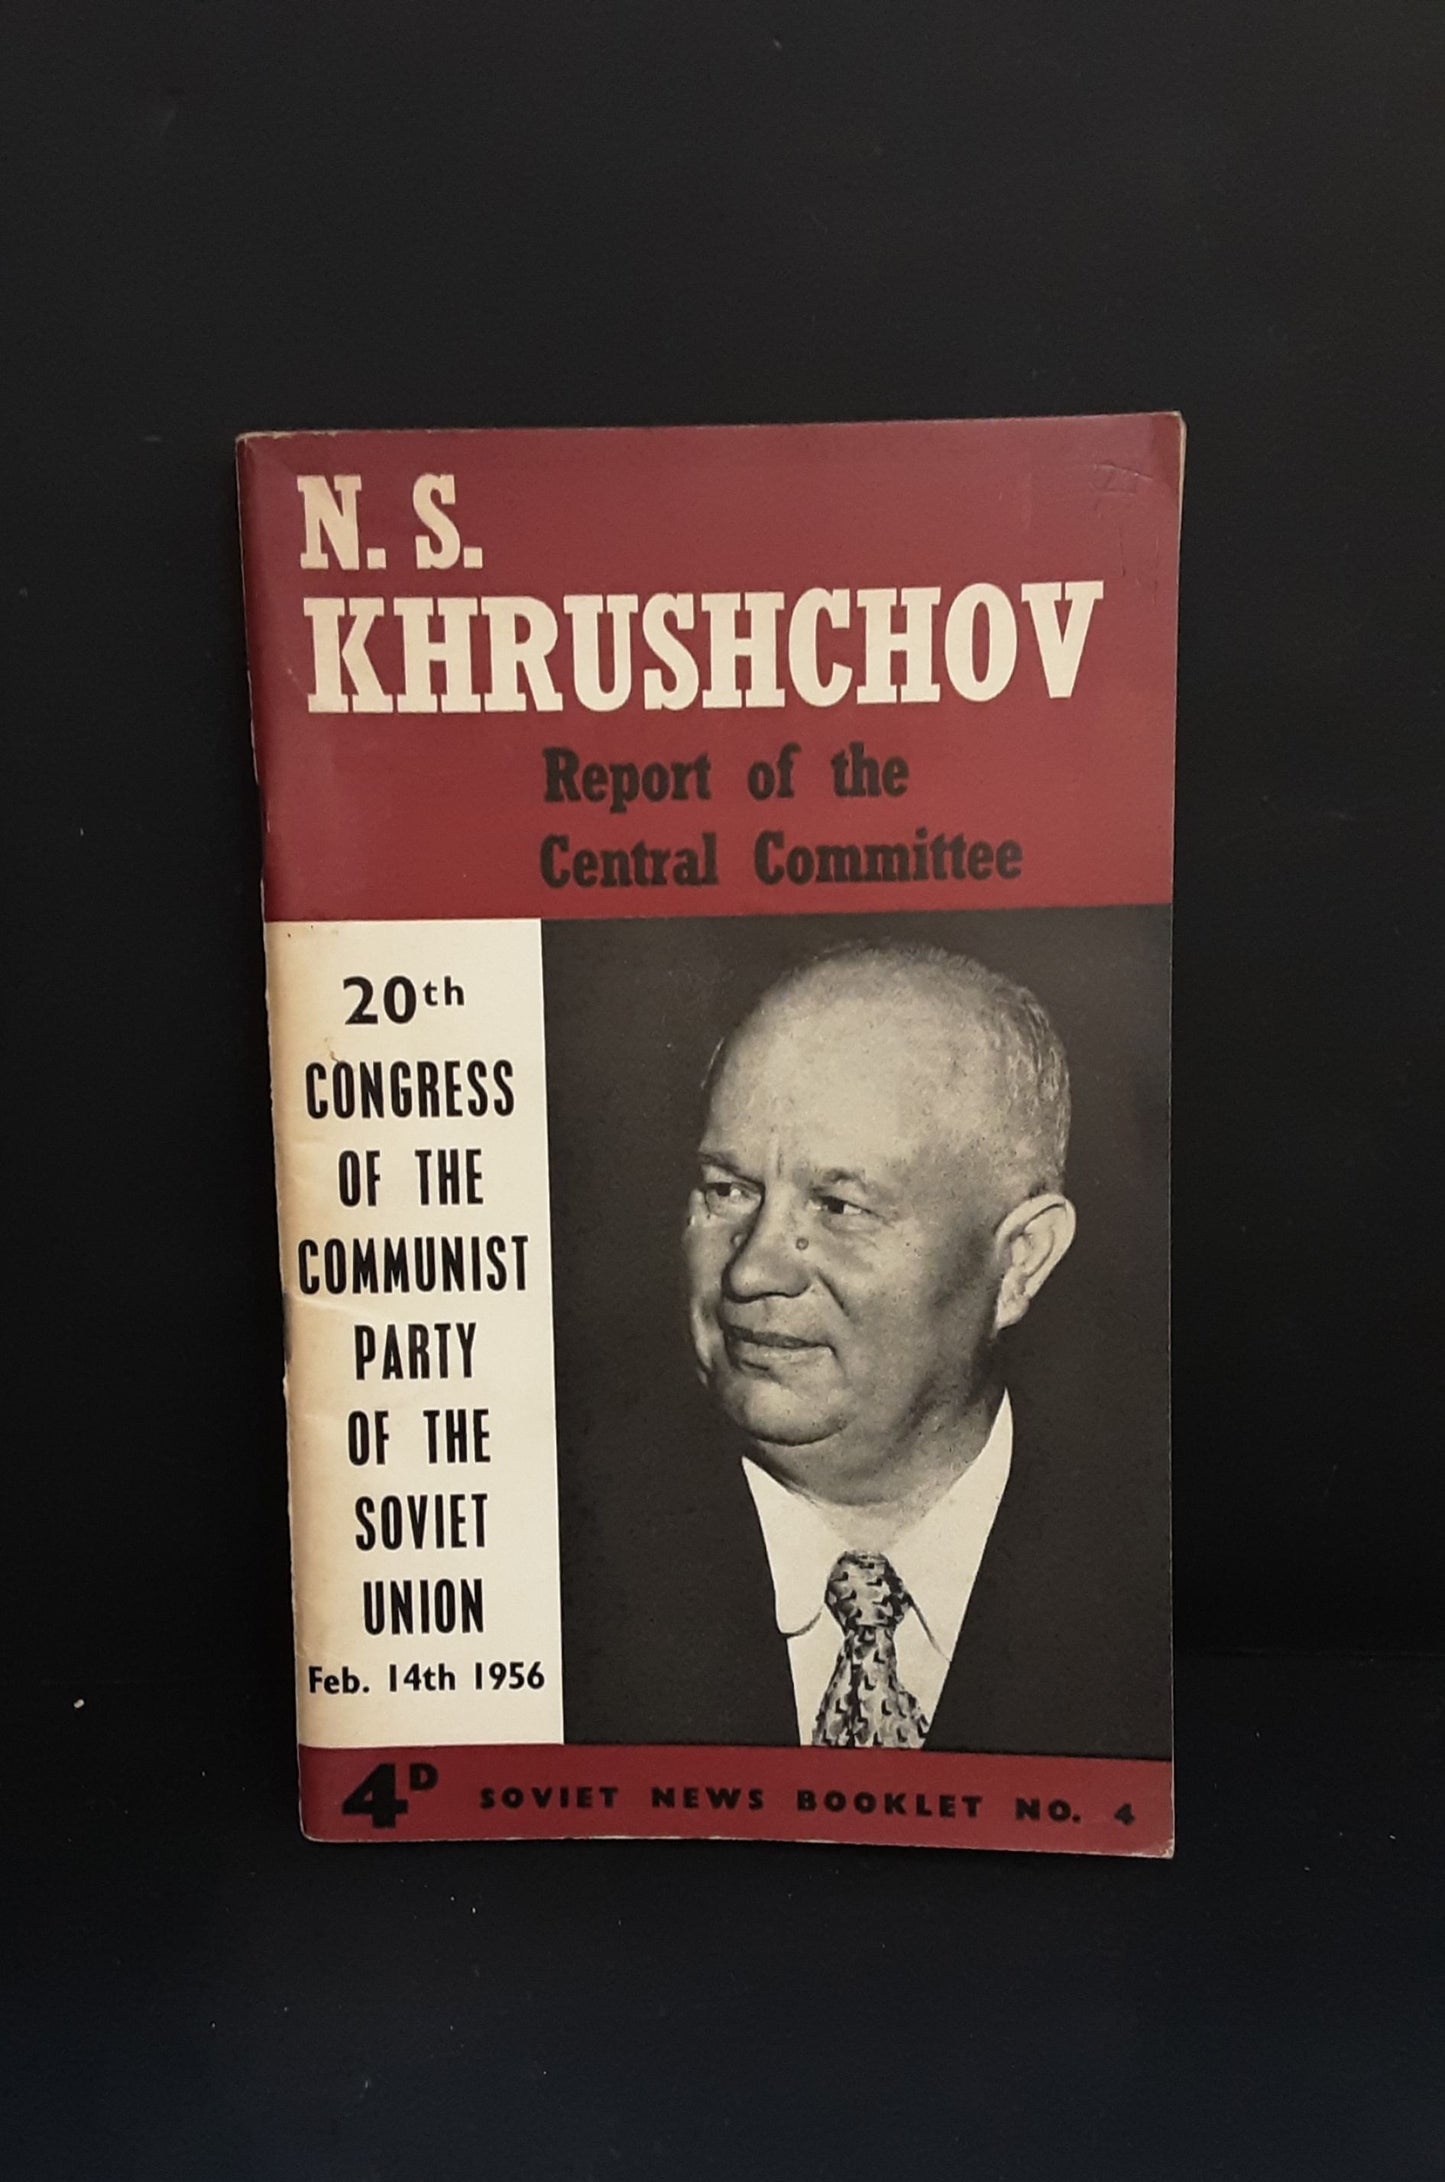 Report of the Central Committee by N. S. Khrushchov, London Soviet News 1956